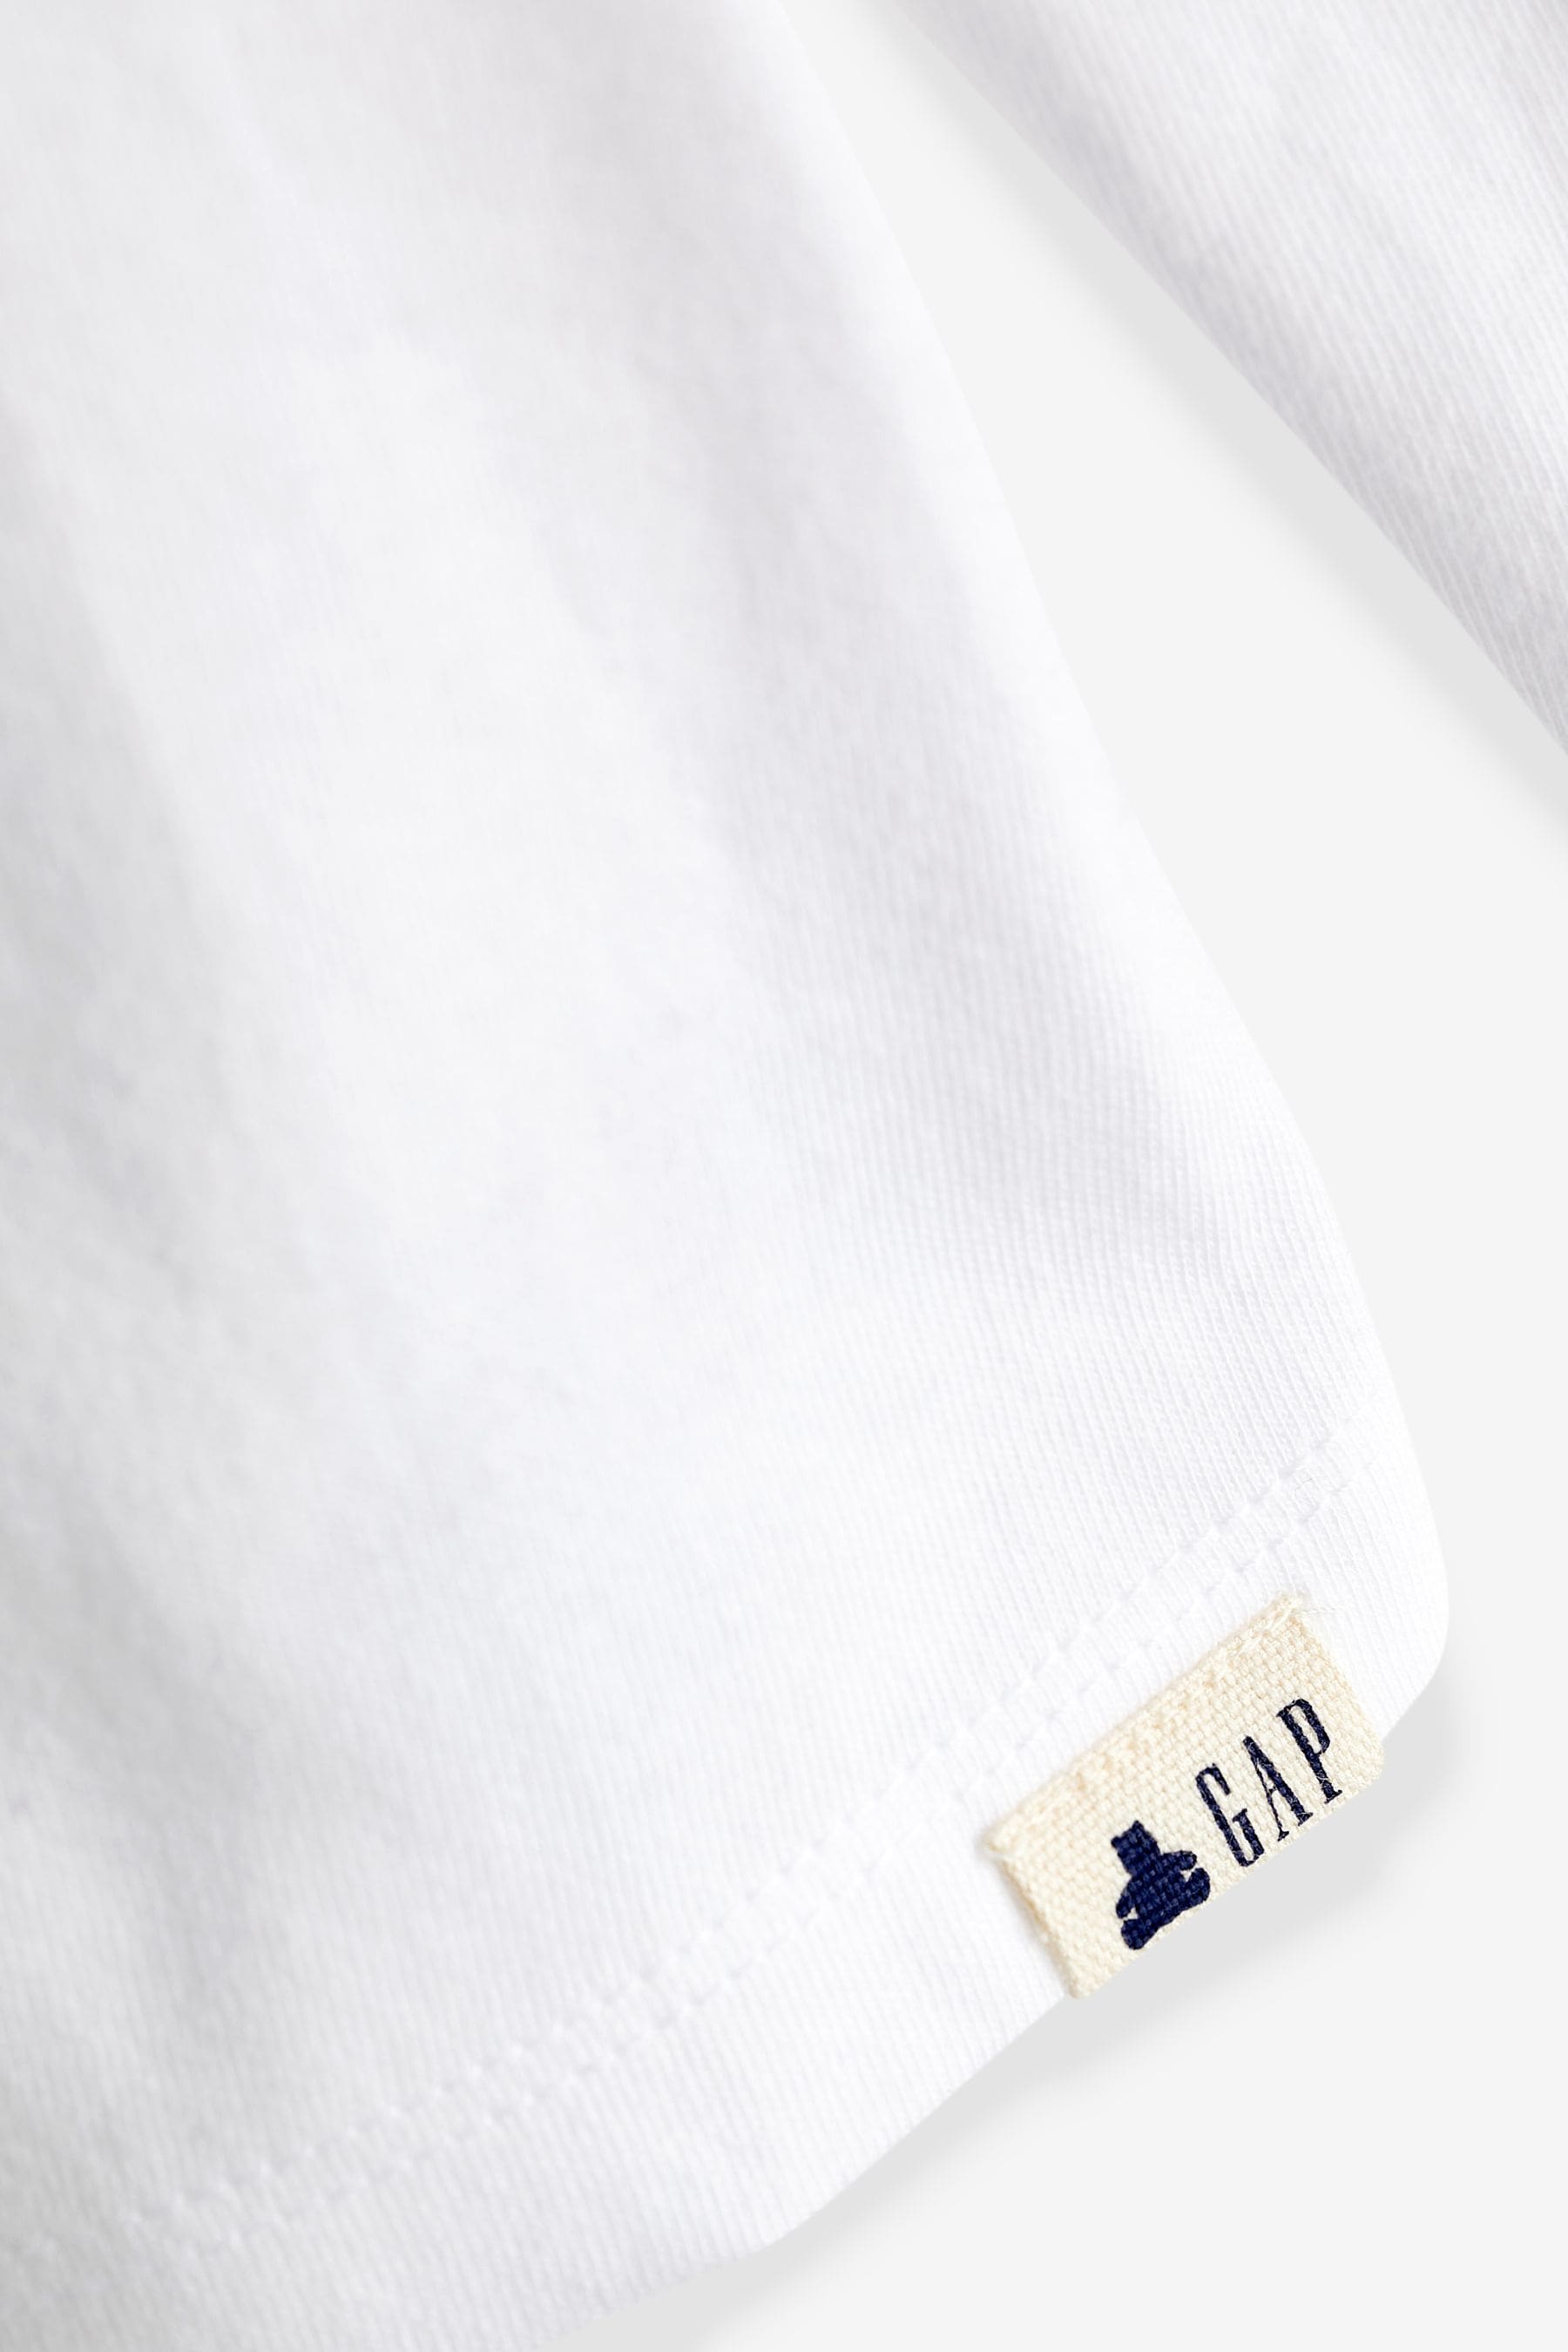 Buy Gap Organic Cotton Mix and Match T-Shirt from the Next UK online shop